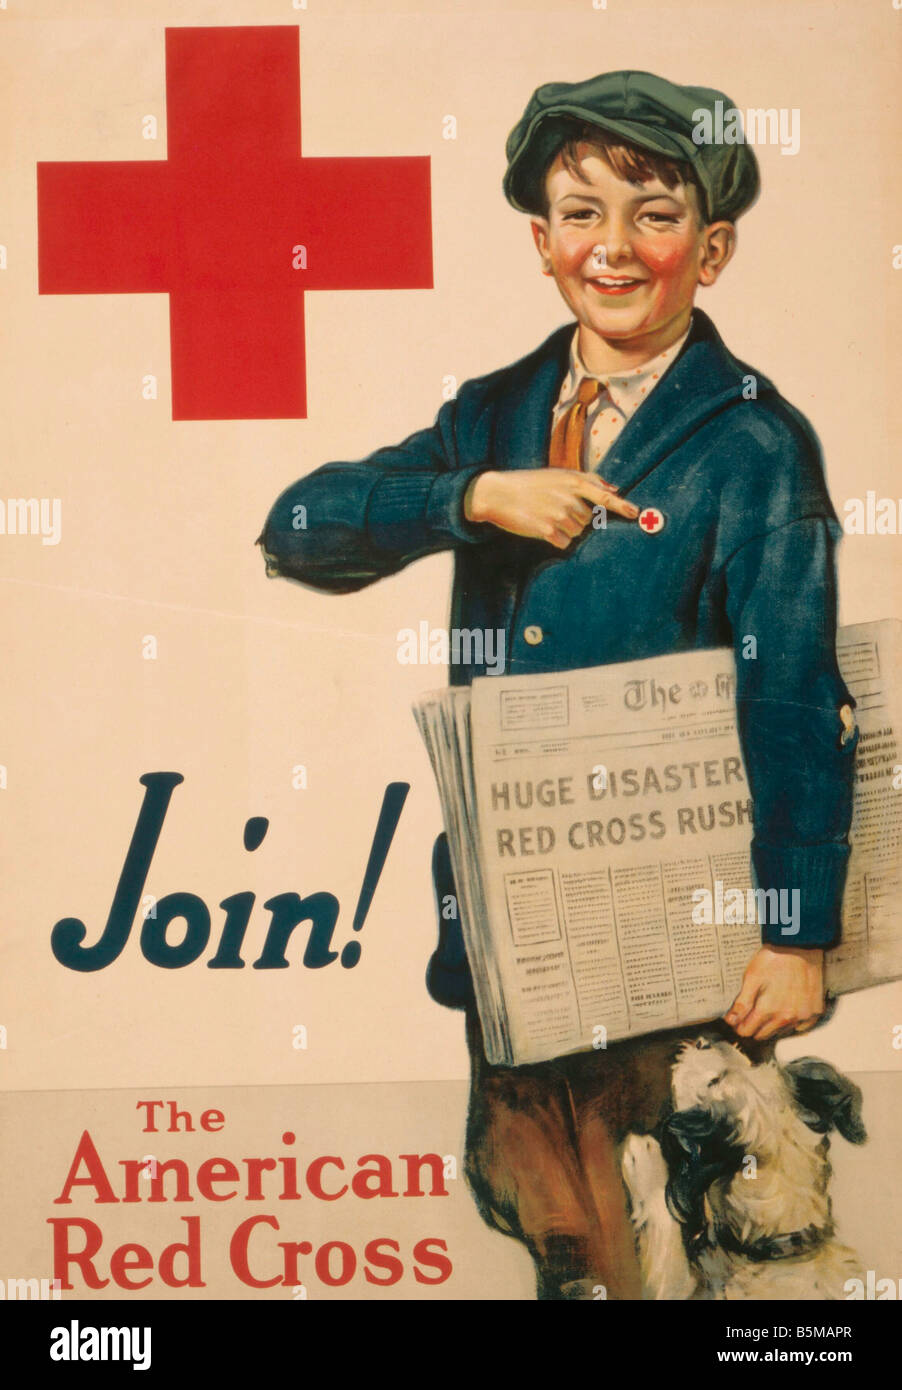 2 M20 R3 1917 Red Cross Recruiting USA Poster 1917 Medicine Red Cross Join The American Red Cross recruiting campaign of the Ame Stock Photo